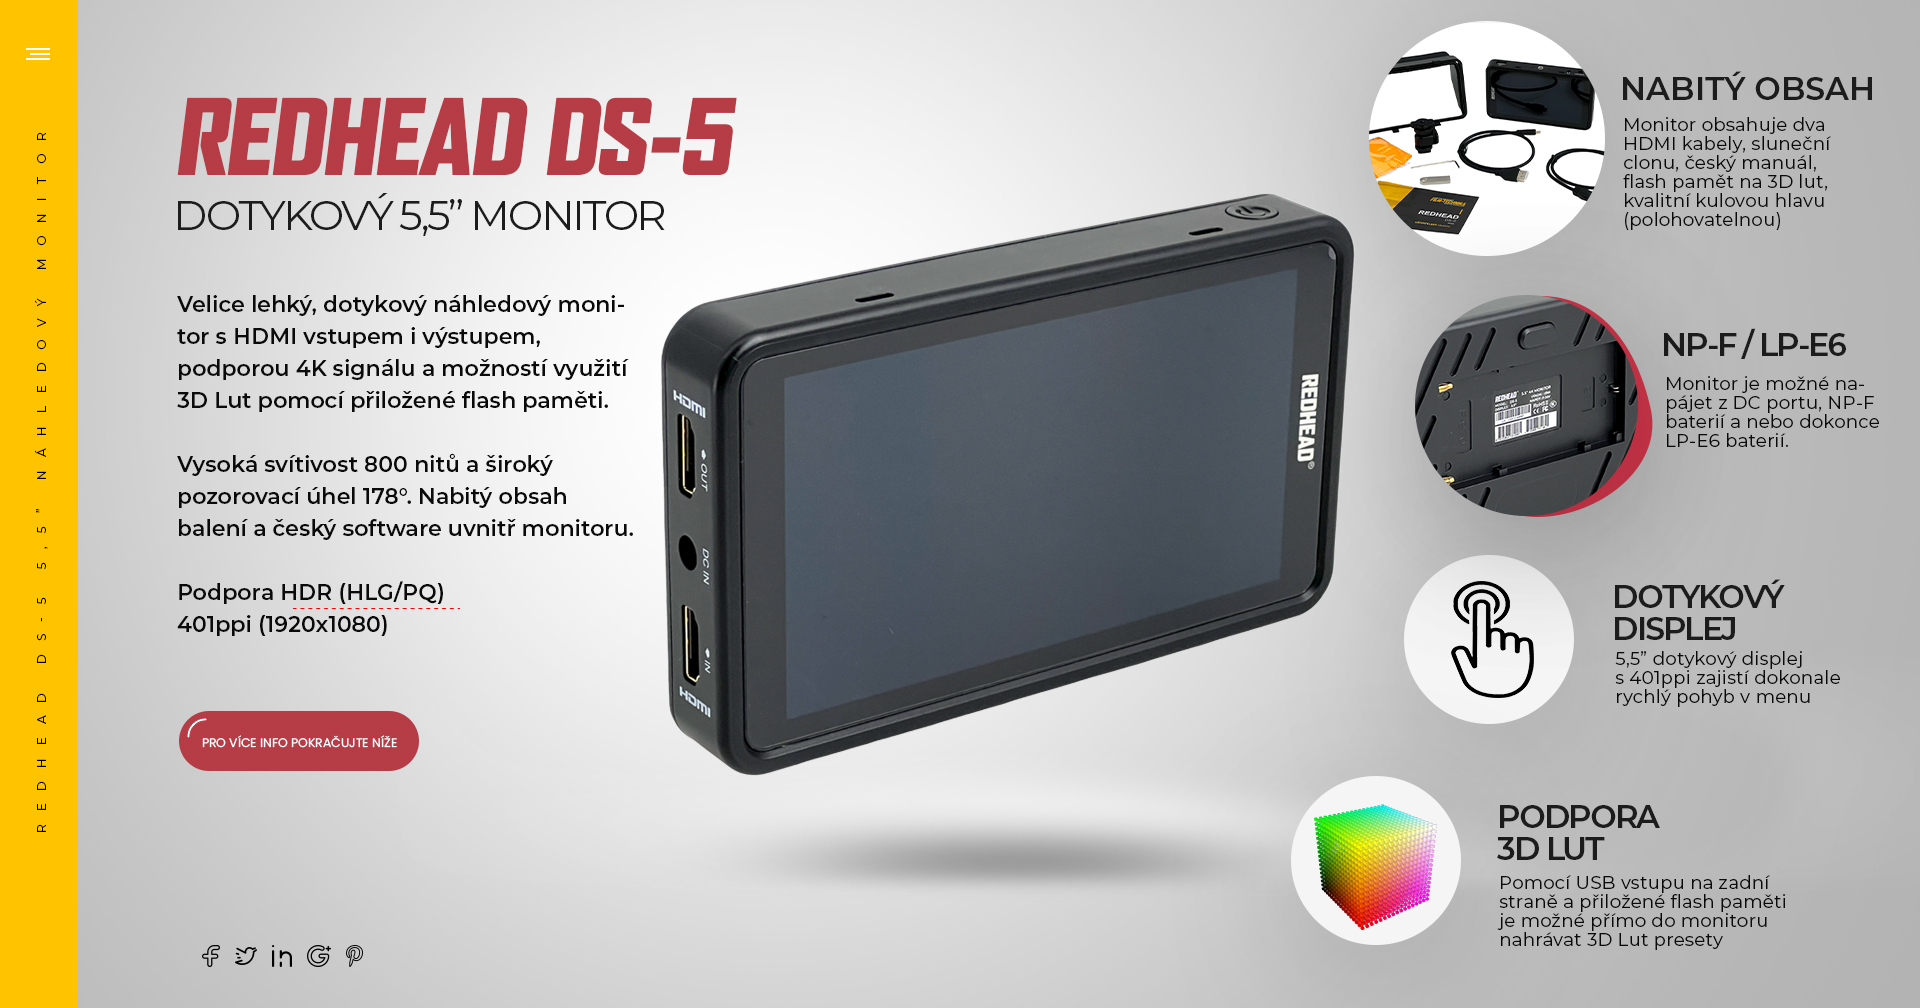 redhead ds-5 monitor